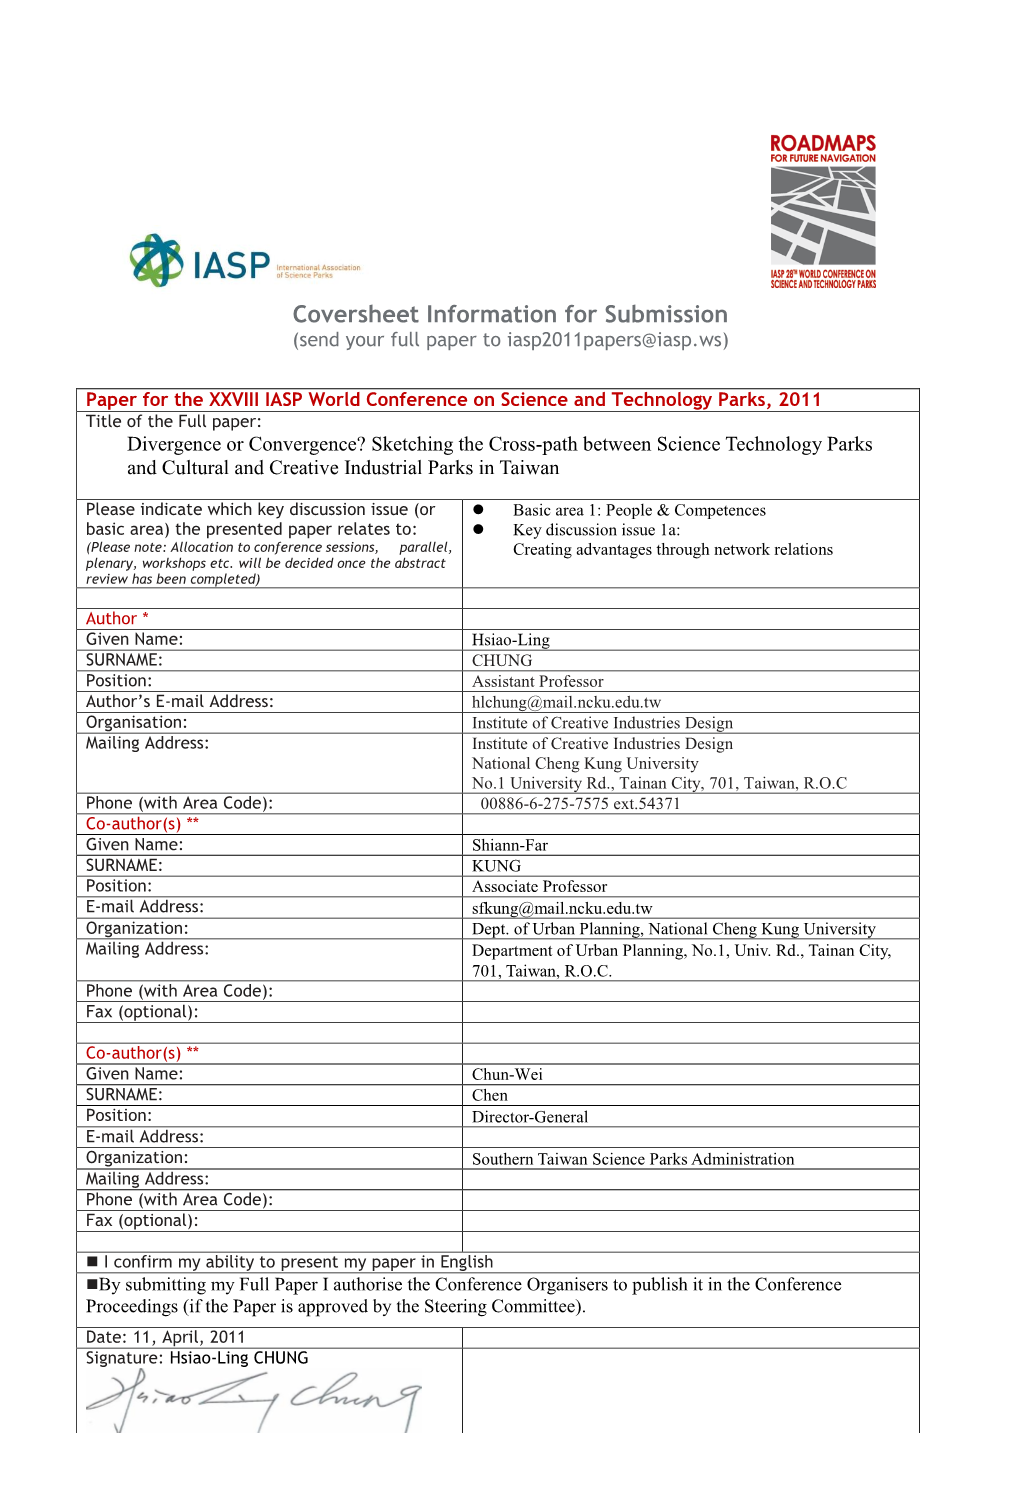 Coversheet Information for Submission (Send Your Full Paper to Iasp2011papers@Iasp.Ws)